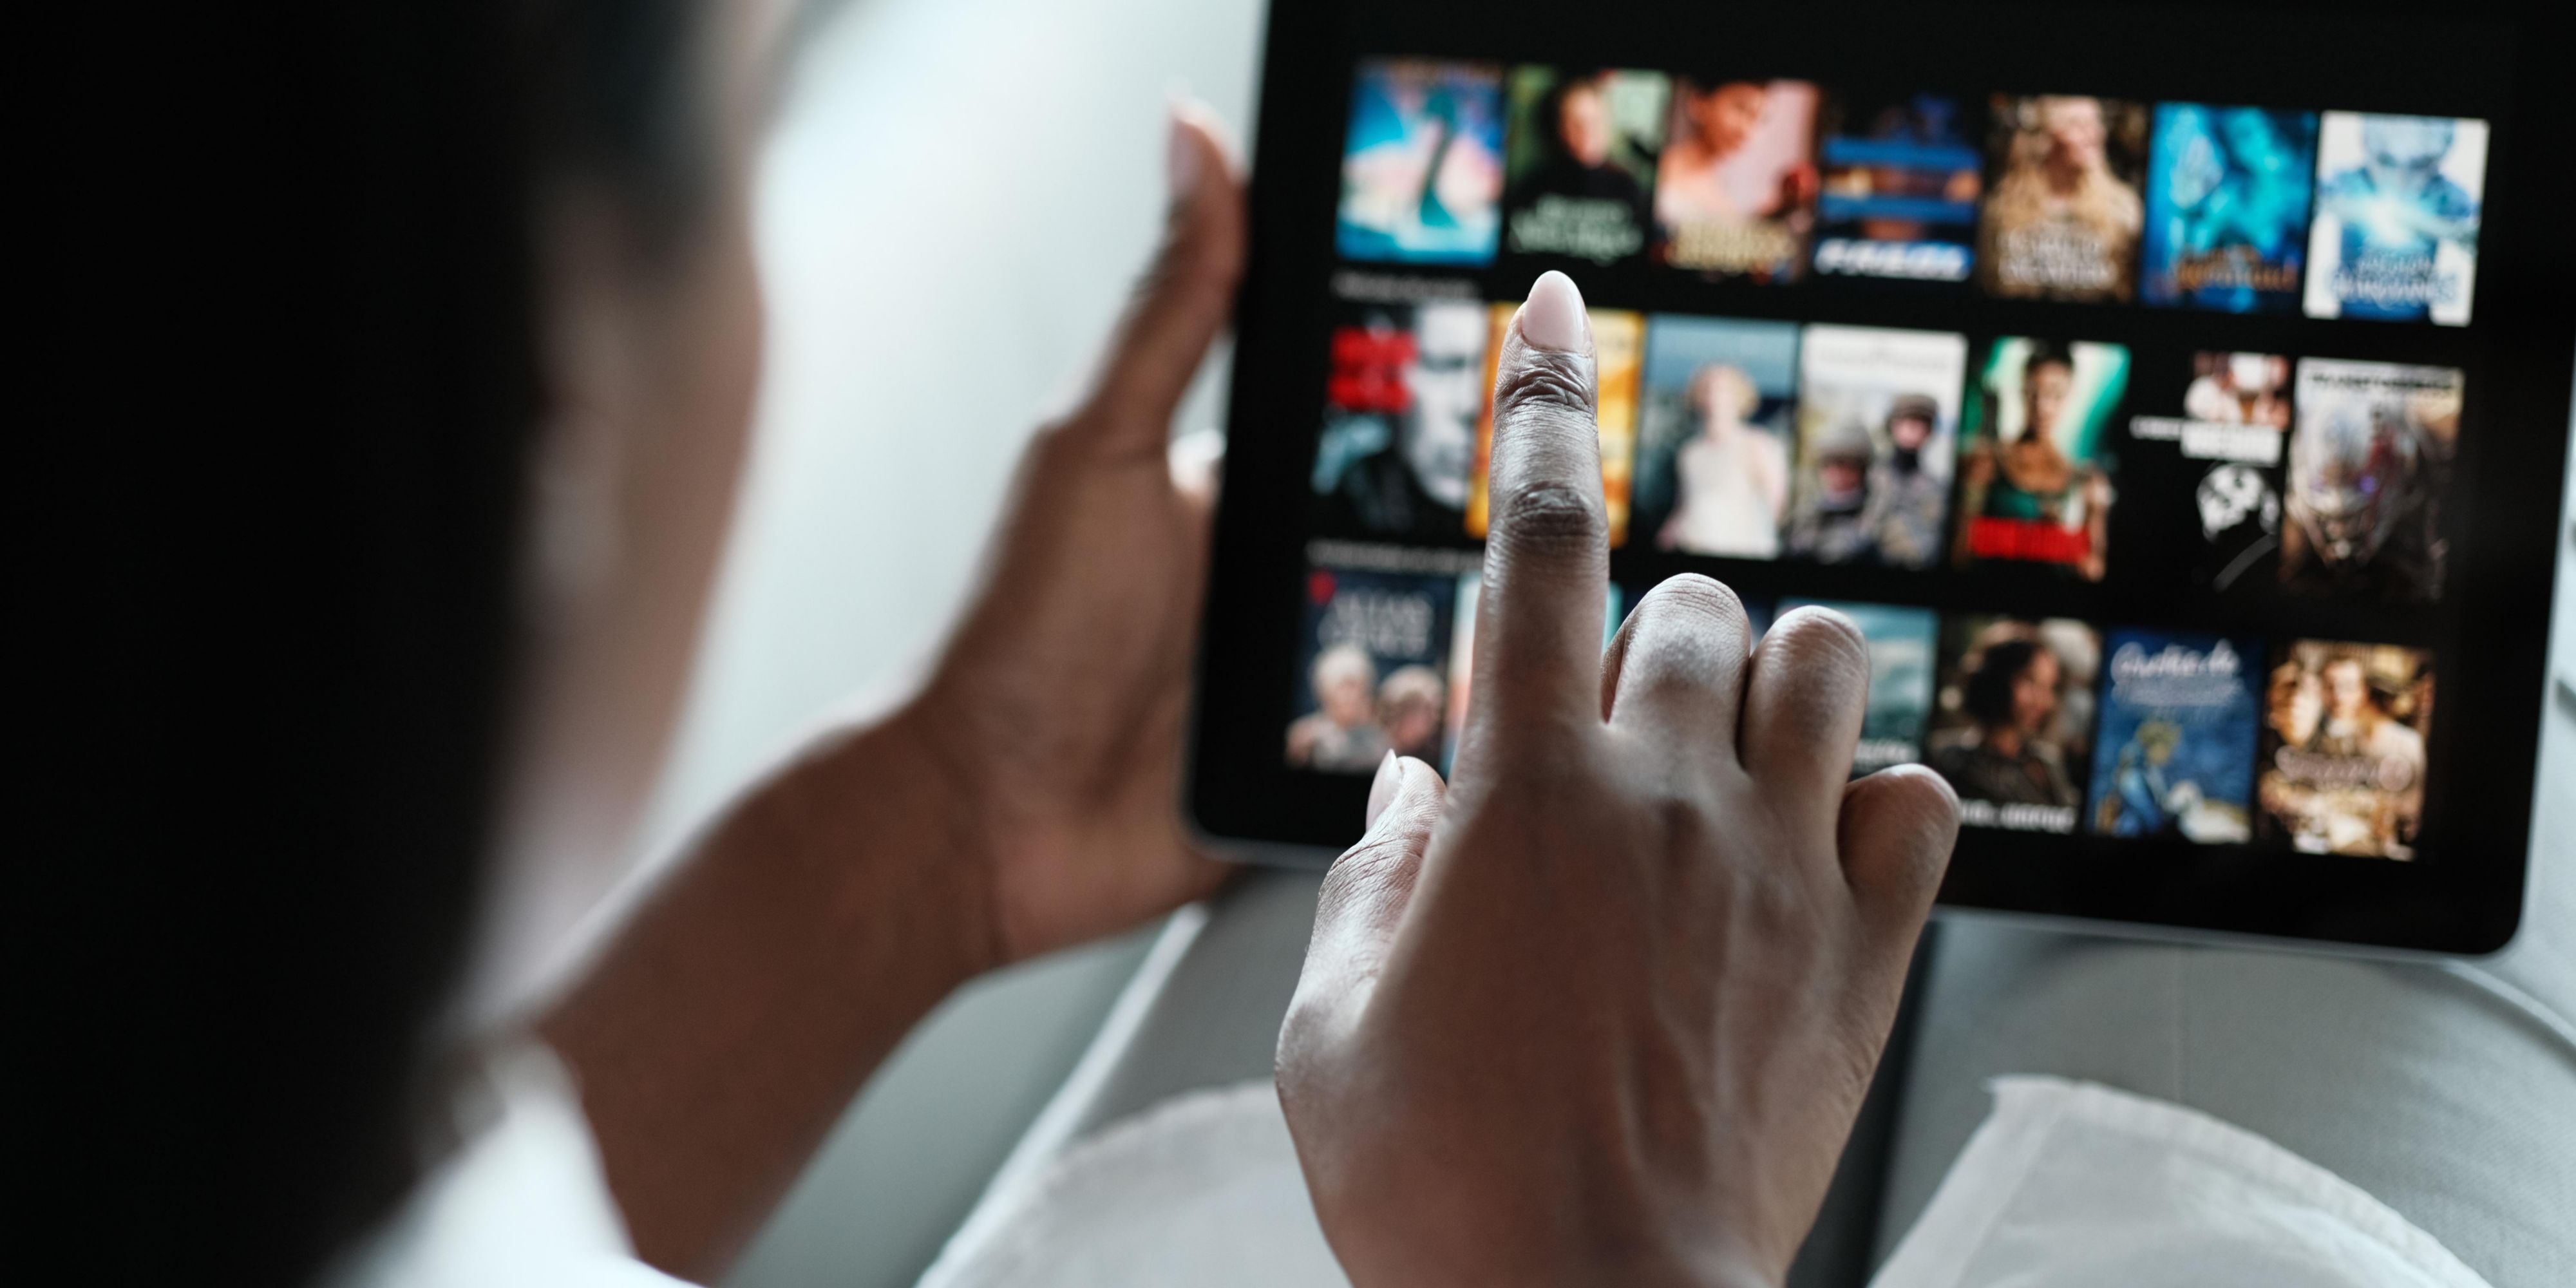 Stream your favourite shows to your devices on the hotel's speedy Wi-Fi. Netflix and chill? Sorted. 